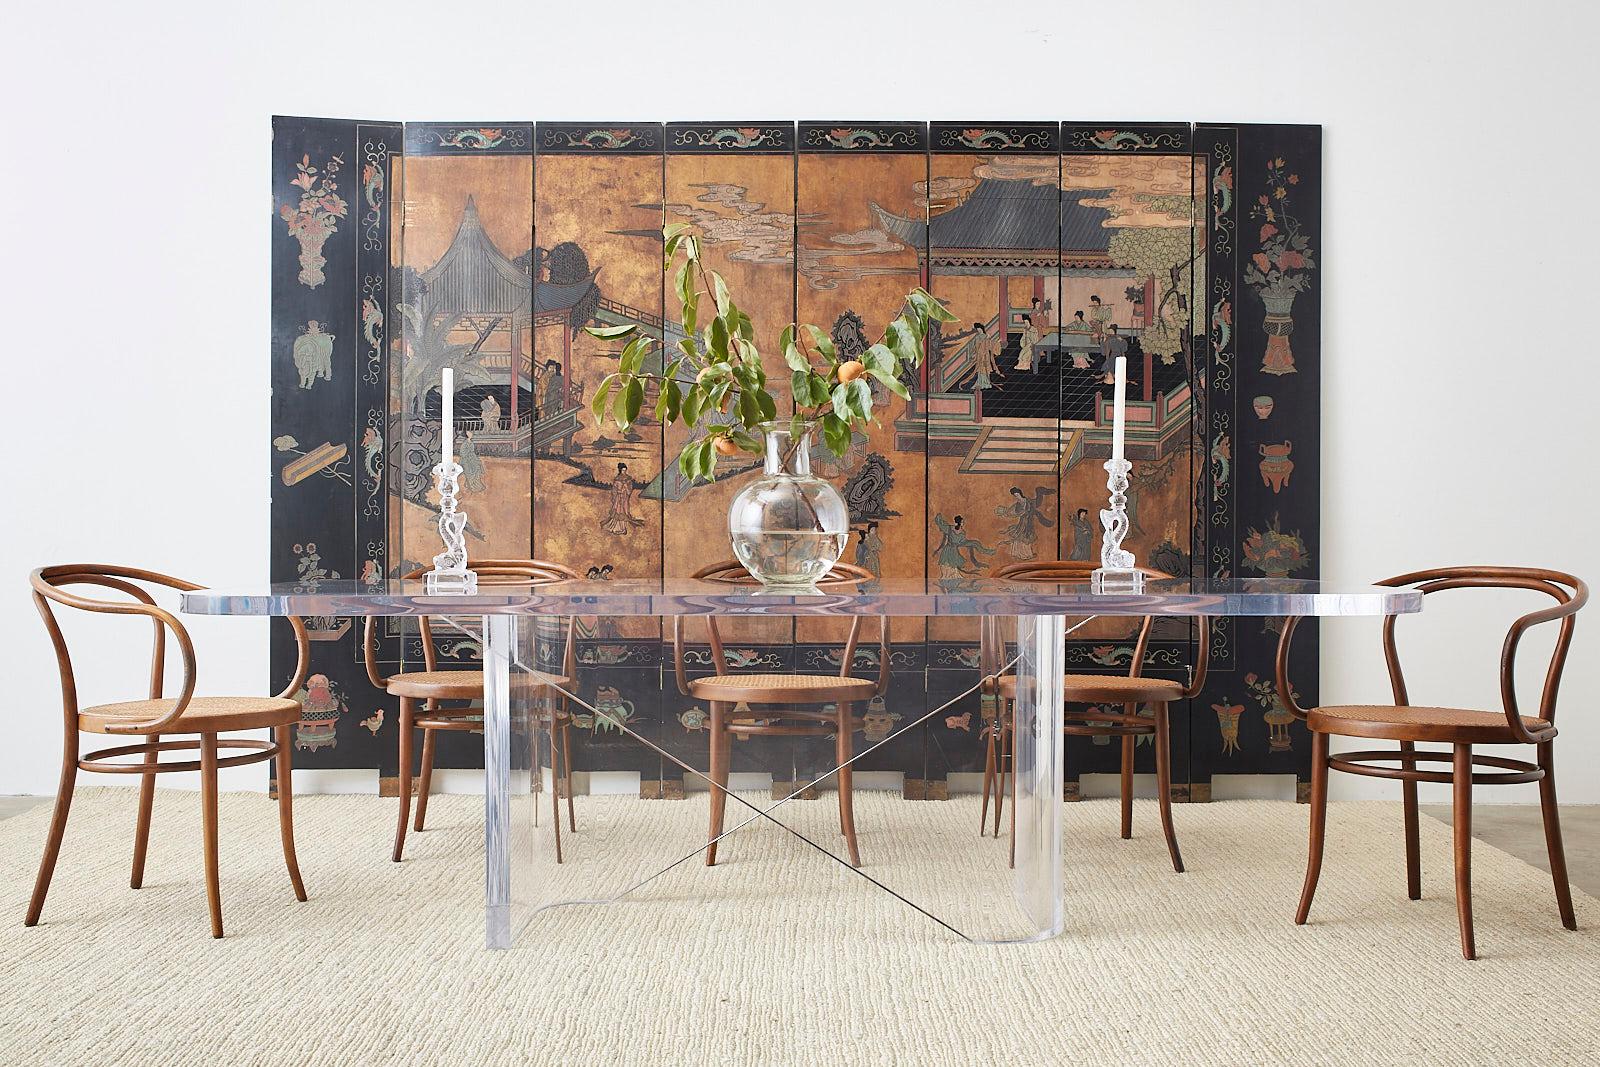 Gorgeous Chinese export eight panel coromandel screen featuring a courtyard scene with beauties amid pagodas. The screen has a gilt background in the center that has faded into a rich hue accented by muted colors of added reds and teal. Bordered